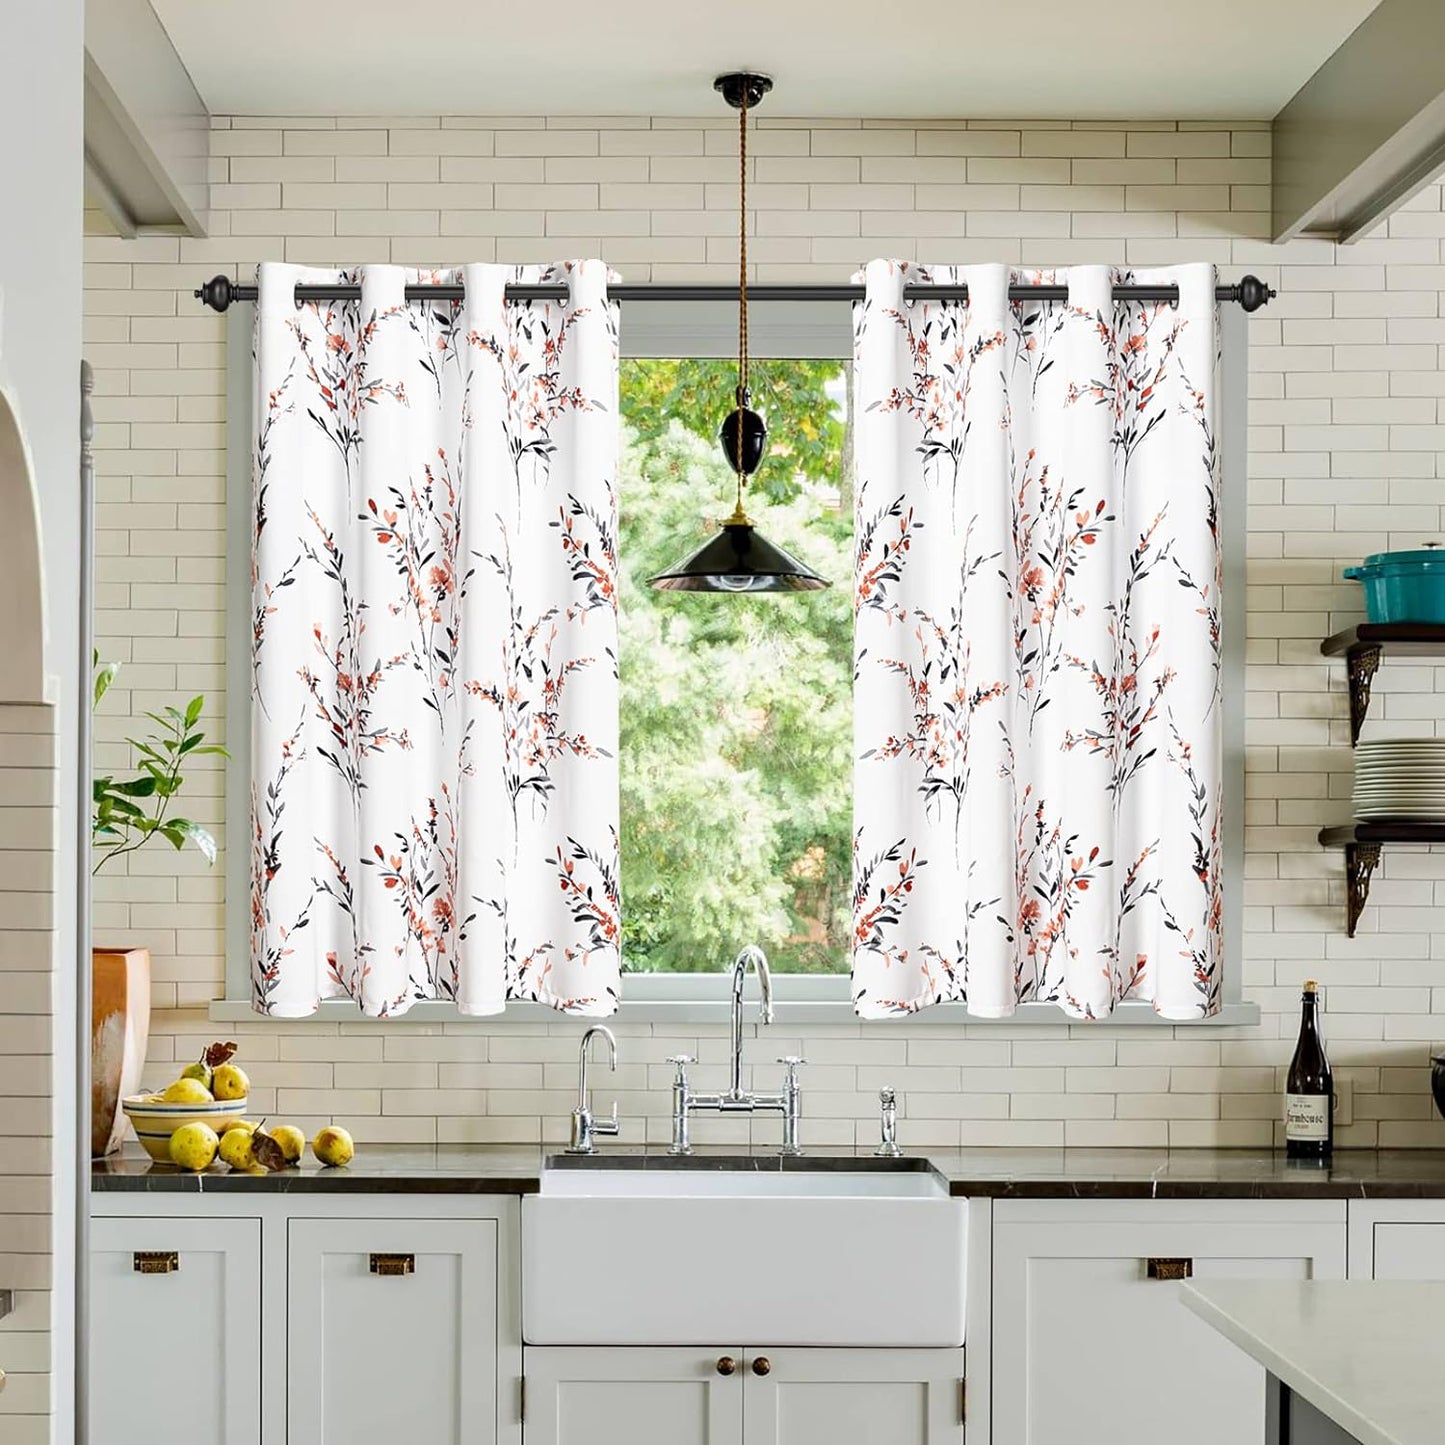 MYSKY HOME Living Room Curtains 84 Inches Long Floral Curtains Light Filtering Thermal Insulated Soft for Dining Room Farmhouse Leaf Grommet Curtains Home Decoration, Set of 2 Panels, Navy Blue  MYSKYTEX Coral 52"W X 45"L 